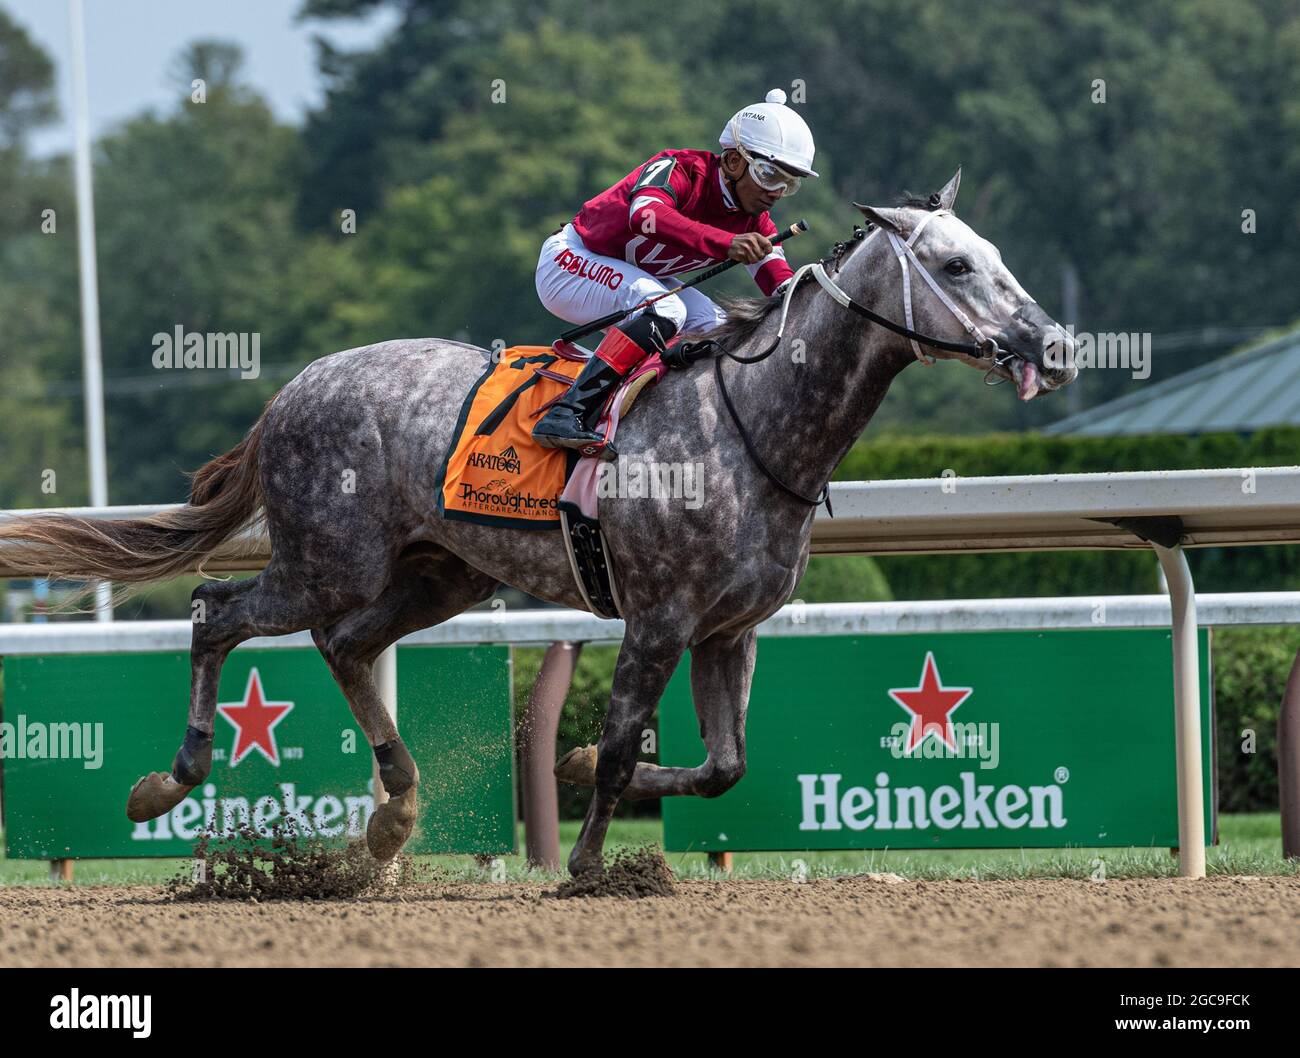 August 7, 2021, Saratoga Springs, New York, USA: 08072021:#7 STELLAR TAP ridden by RICARDO SANTANA wins the 5th race to give Steve Asmussen his 9446th win at Saratoga Race Course.Robert Simmons/Eclipse Sportswire Stock Photo